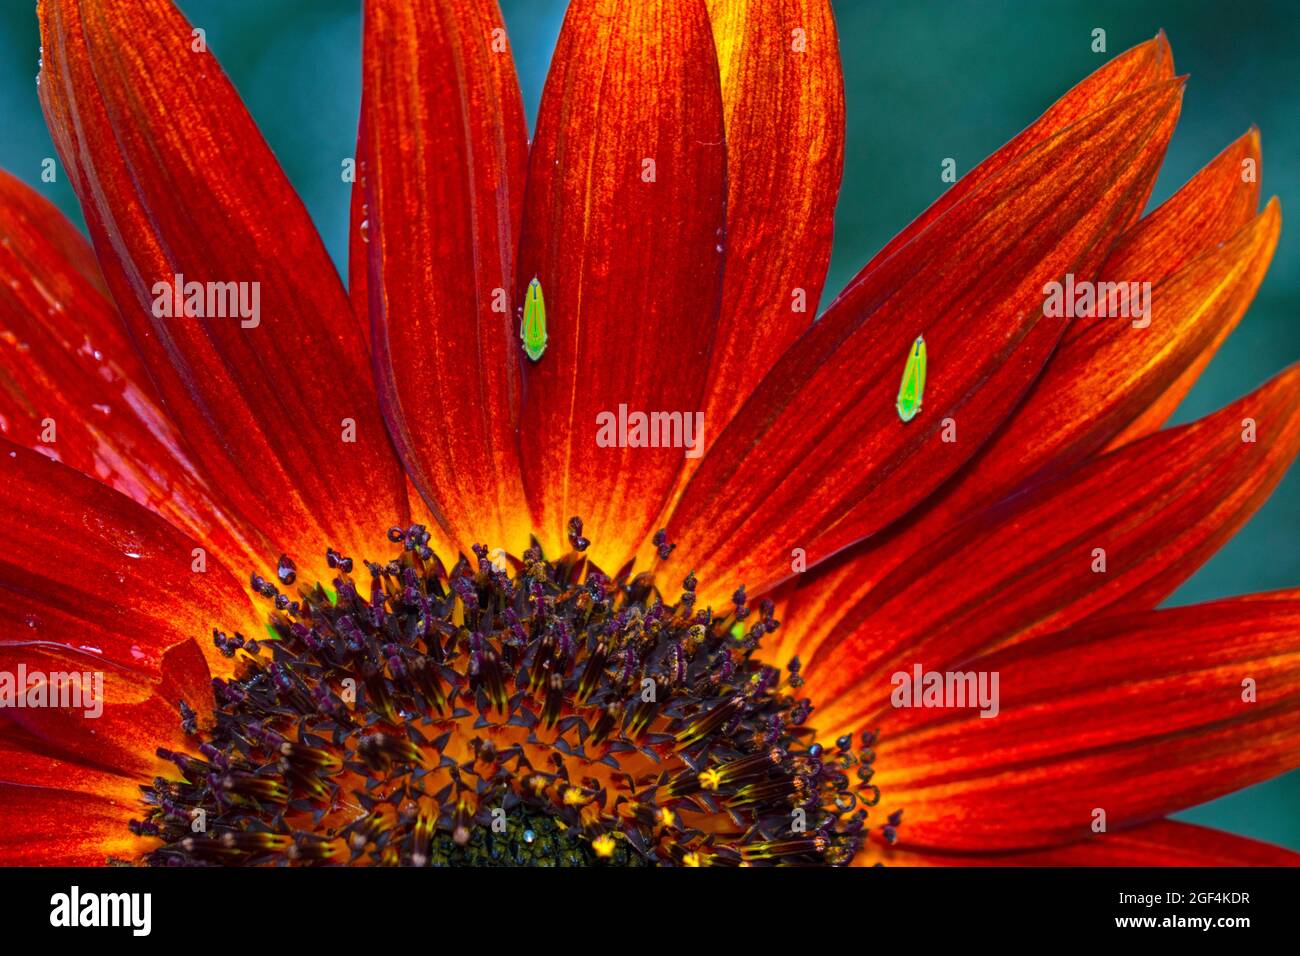 Leaf hopper (versute sharpshooter) insects feasting on the petals of a red sunflower head -08 Stock Photo